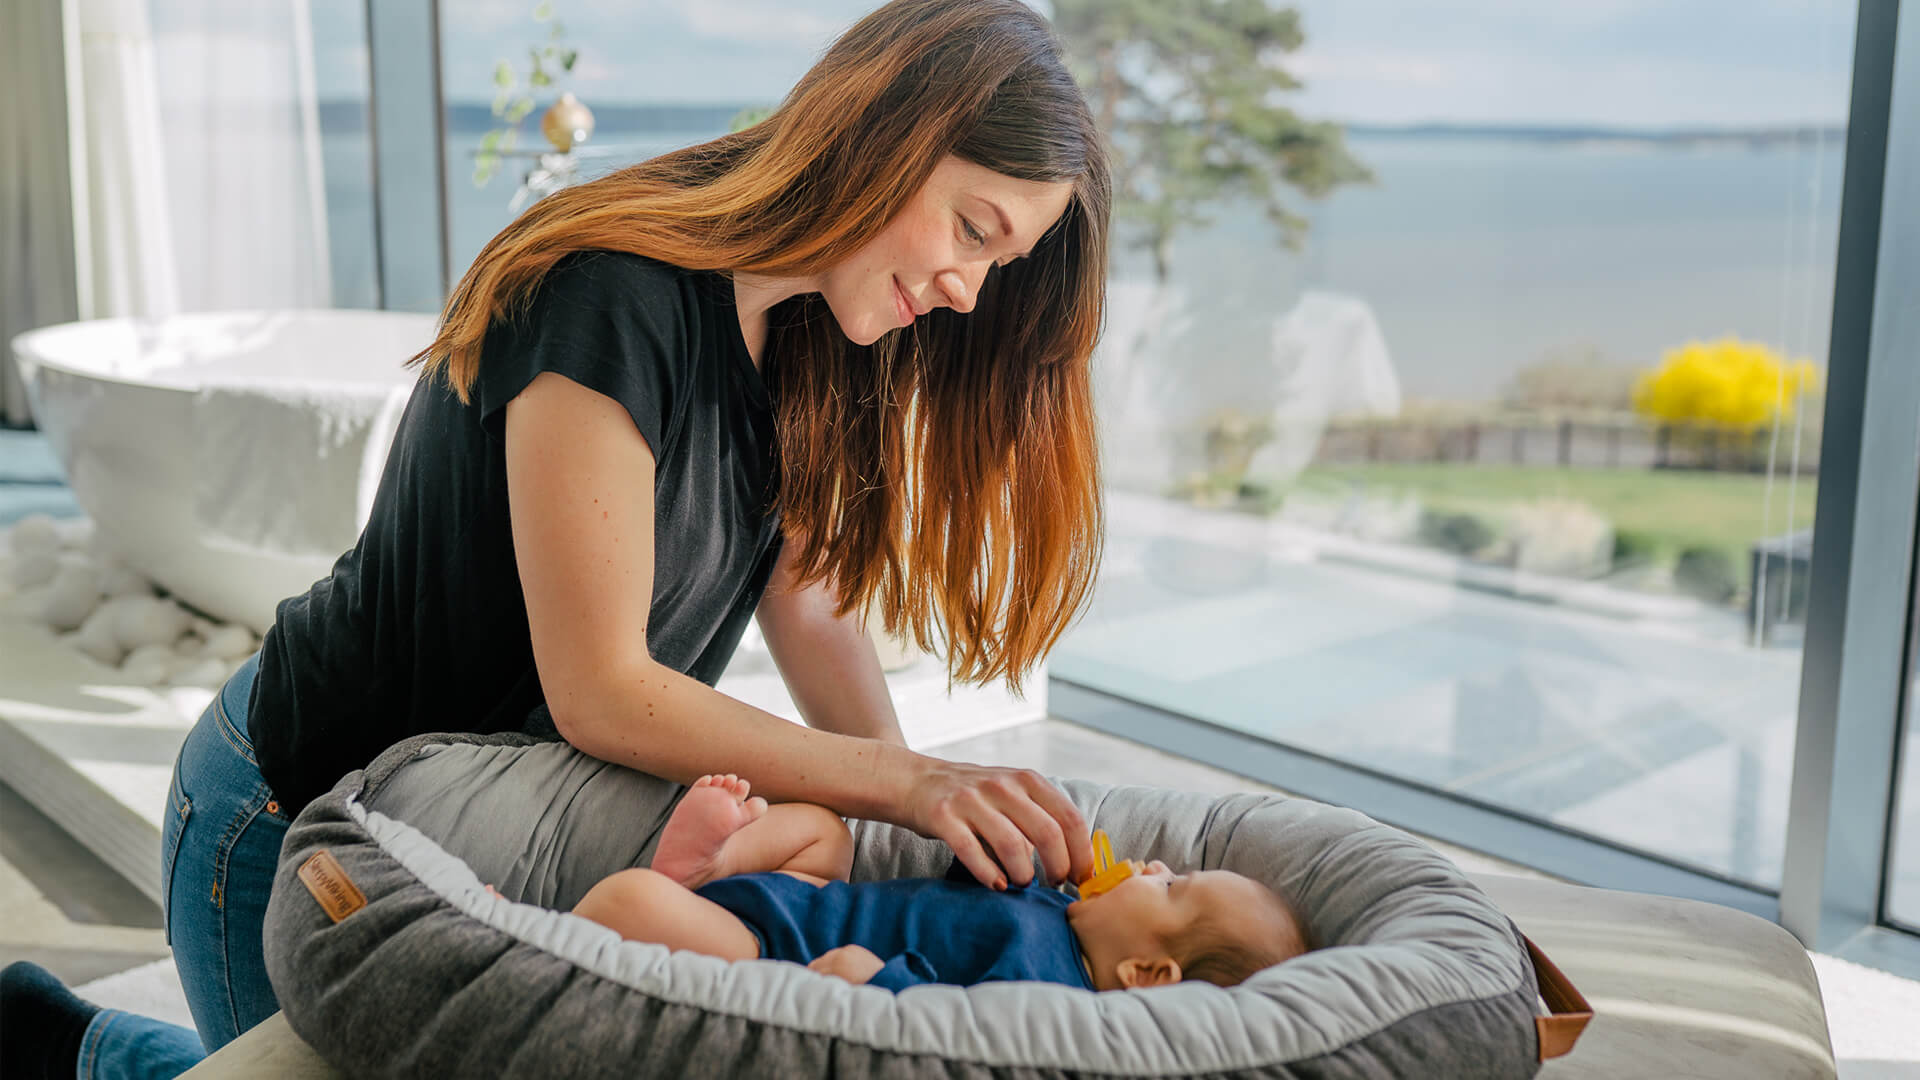 HOW TO USE A BABY NEST? – EcoViking